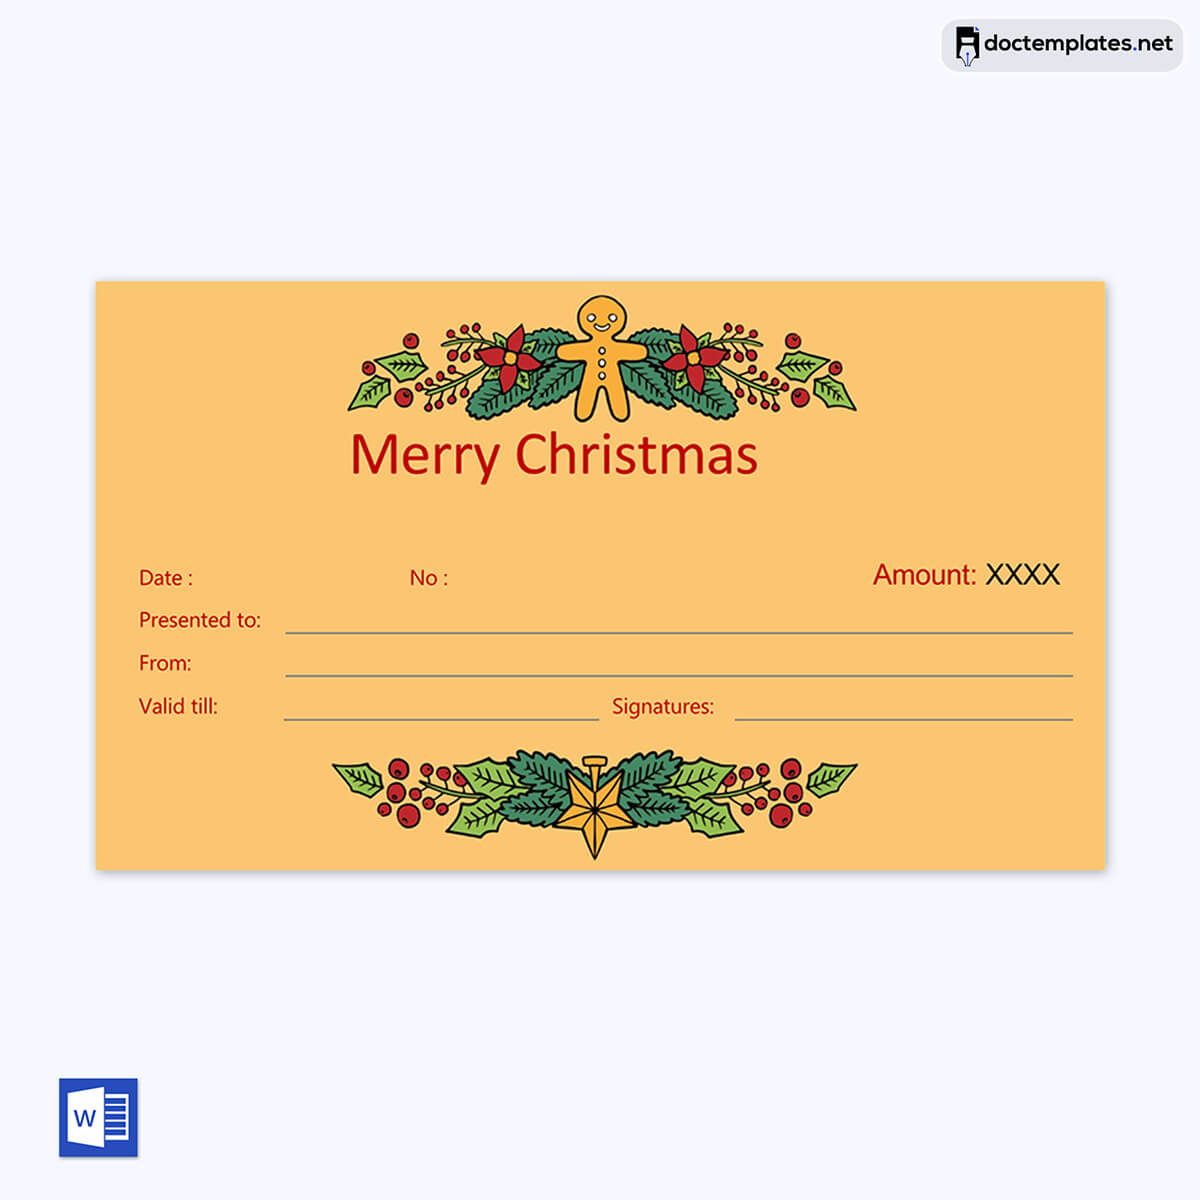 Image of Sample gift certificates to print Sample gift certificates to print 03